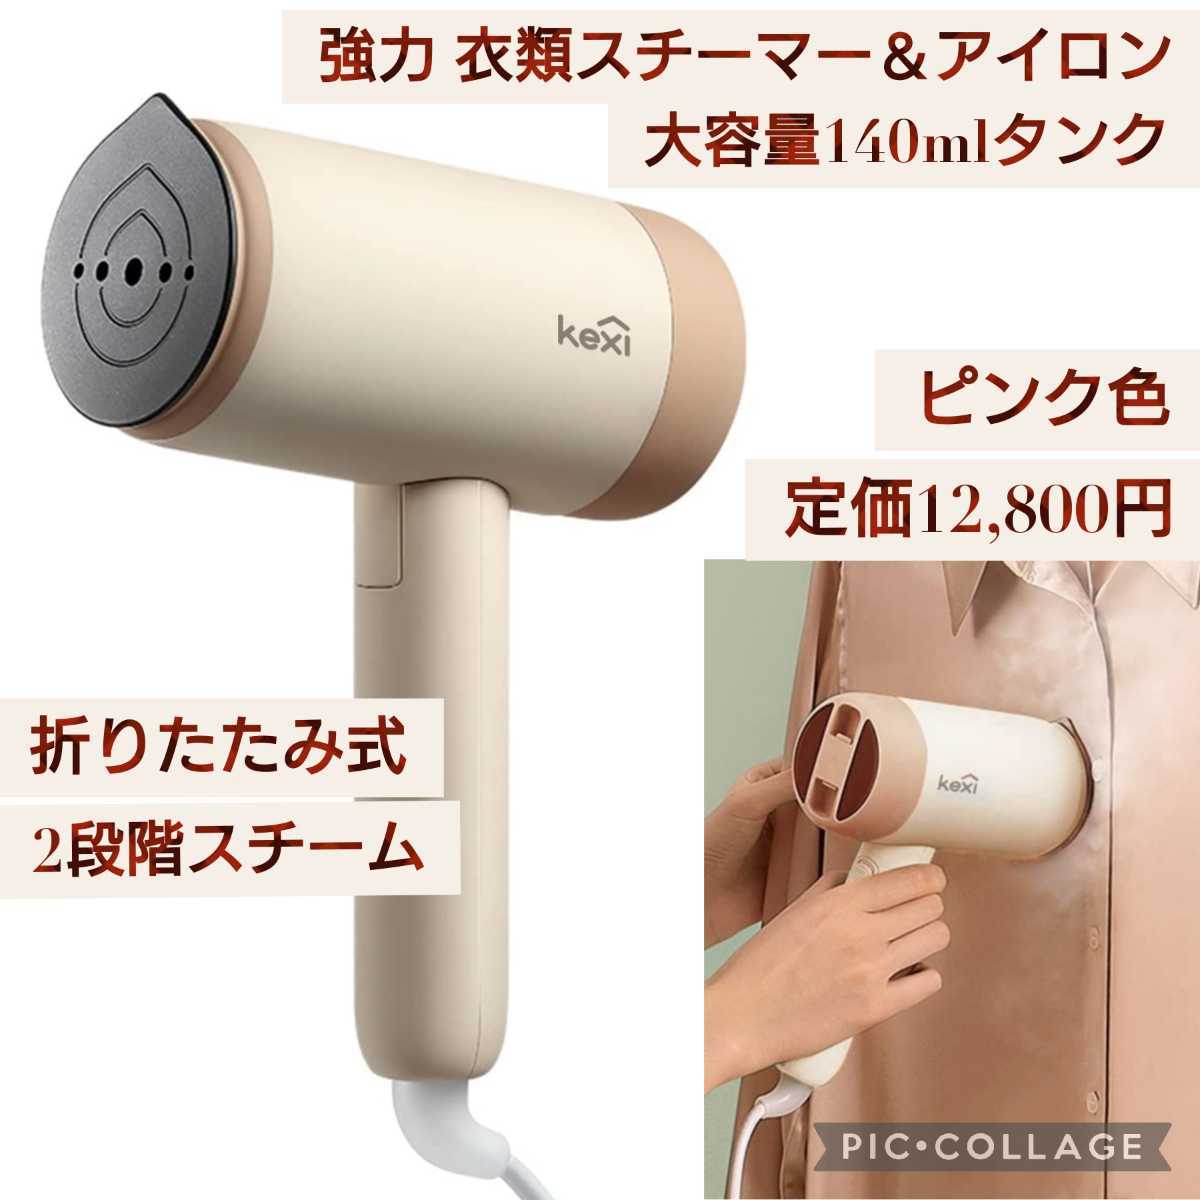  new goods * regular price 12,800 jpy pink color * powerful clothes steamer steam iron folding type hanger .. digit ..2 -step steam 140ml high capacity tanker 